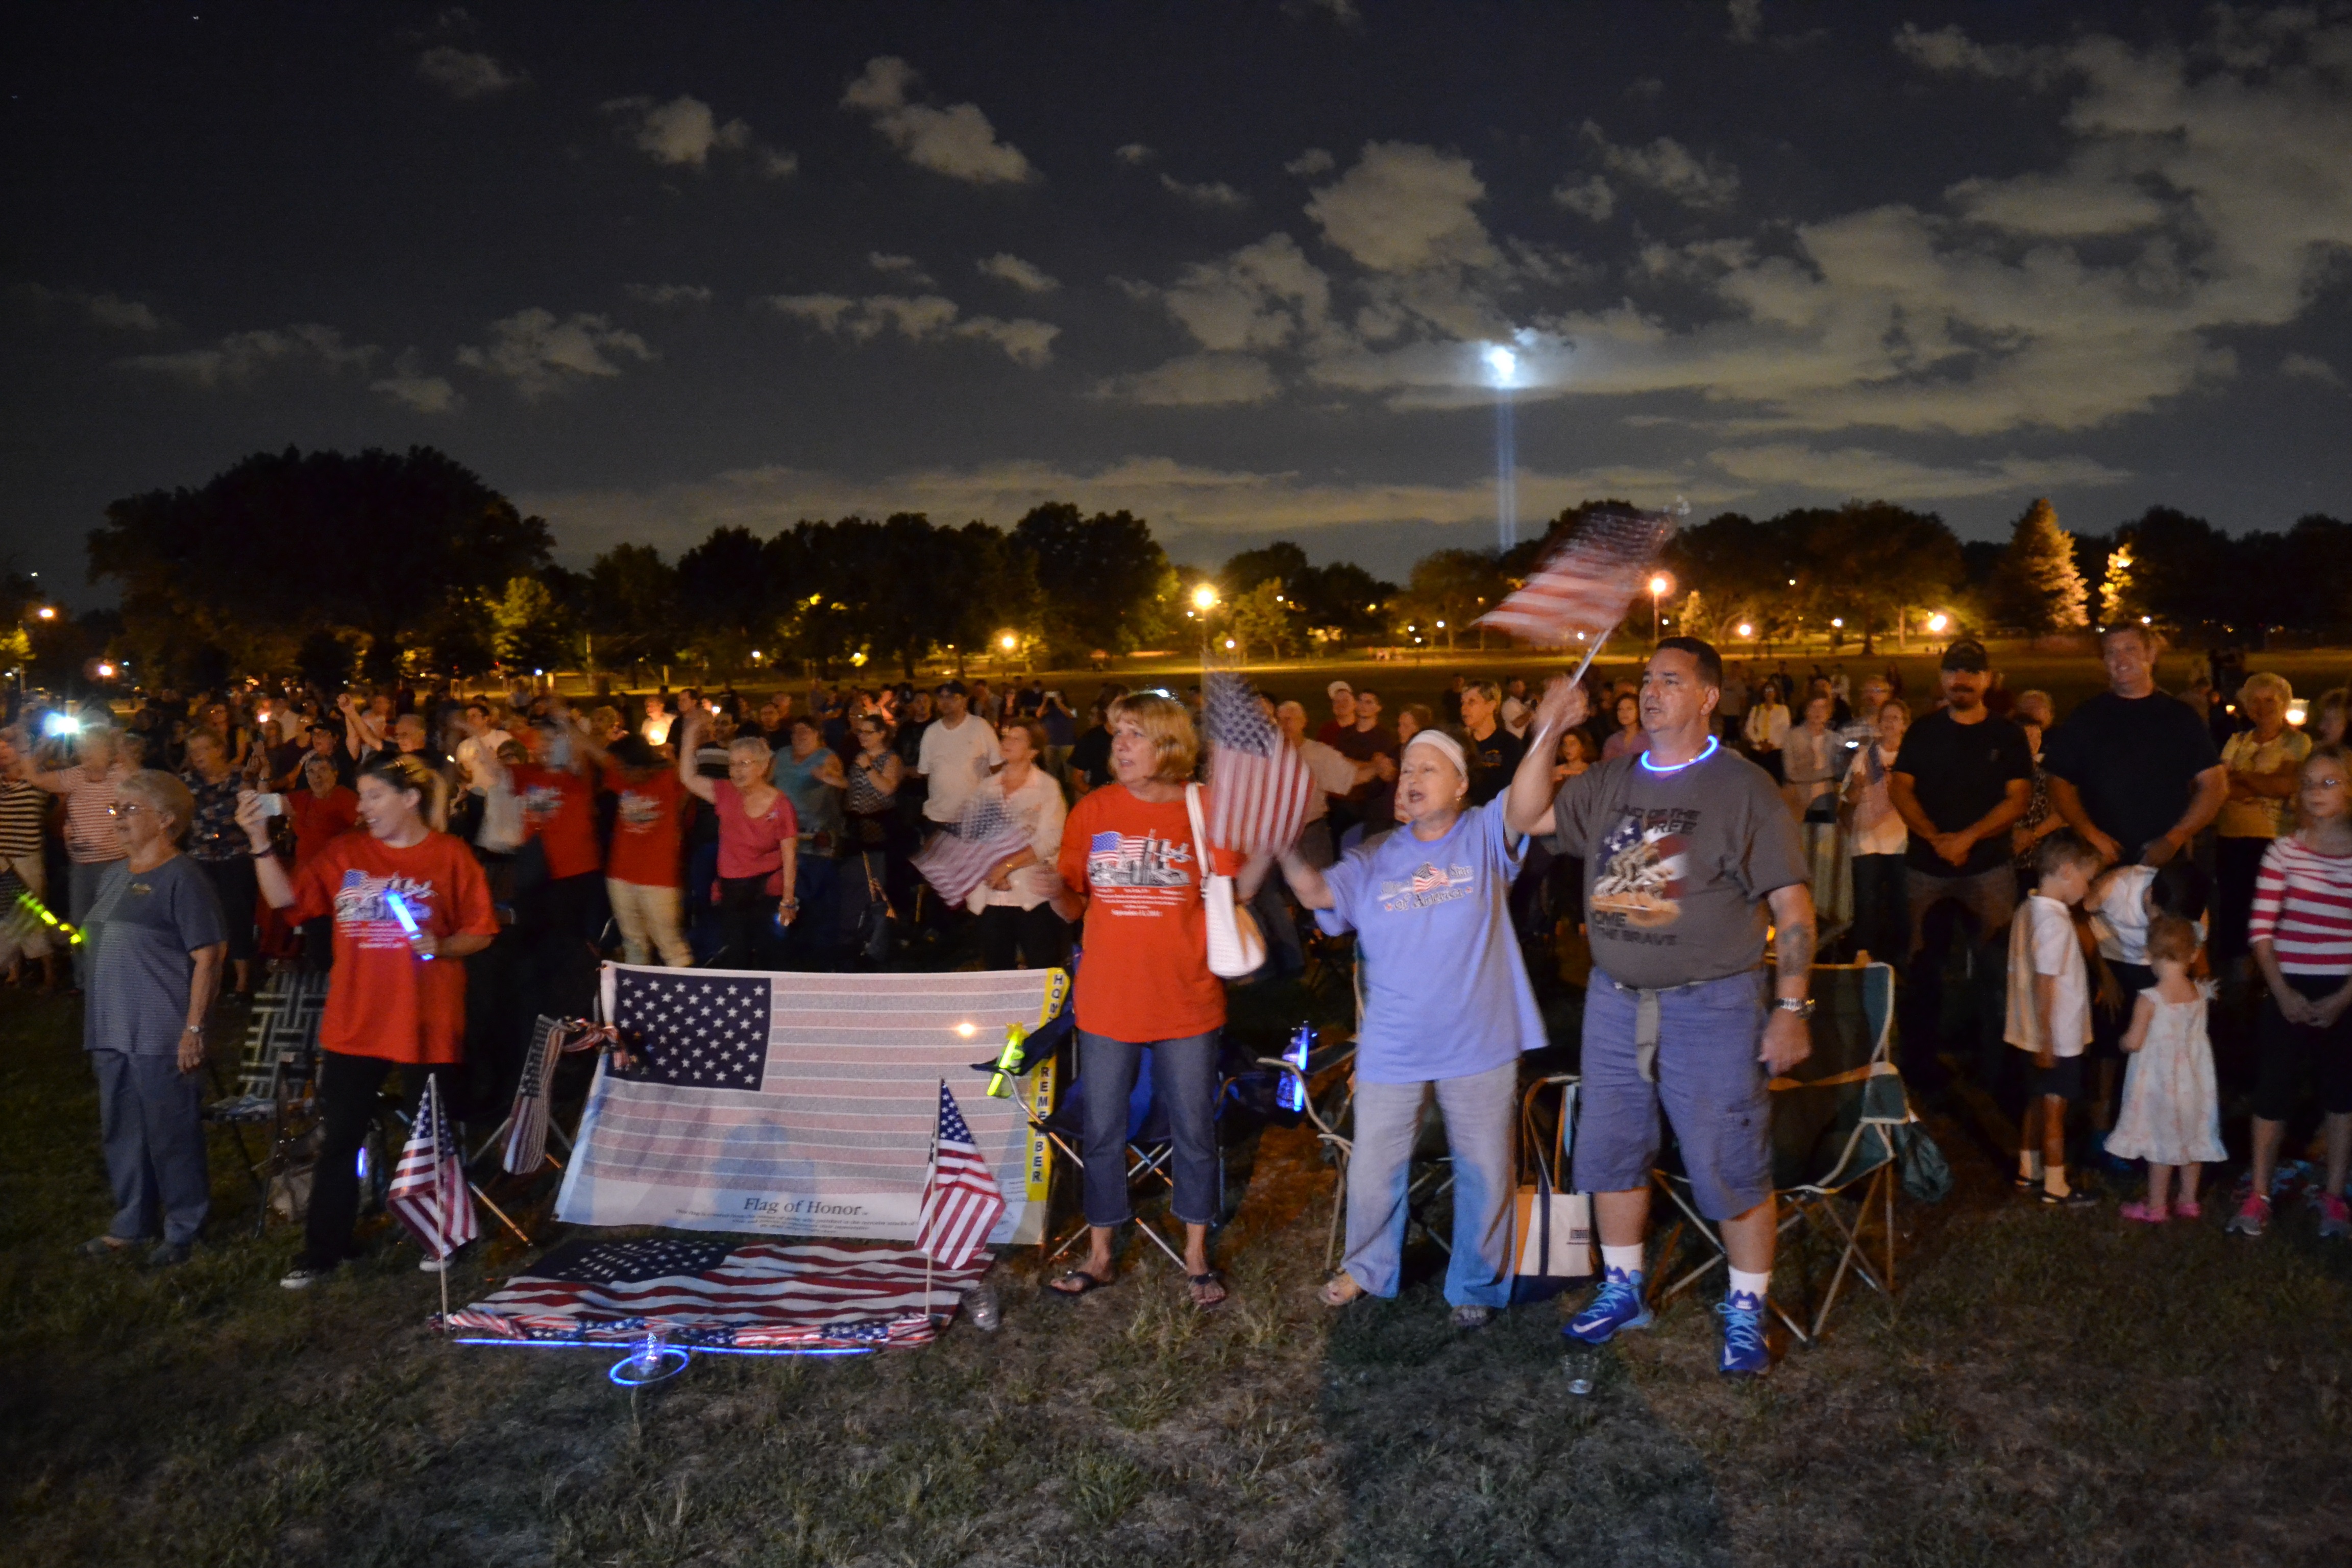 The 9/11 memorial service in 2015 at Juniper Valley Park in Middle Village, with the Tribute in Light in the background.